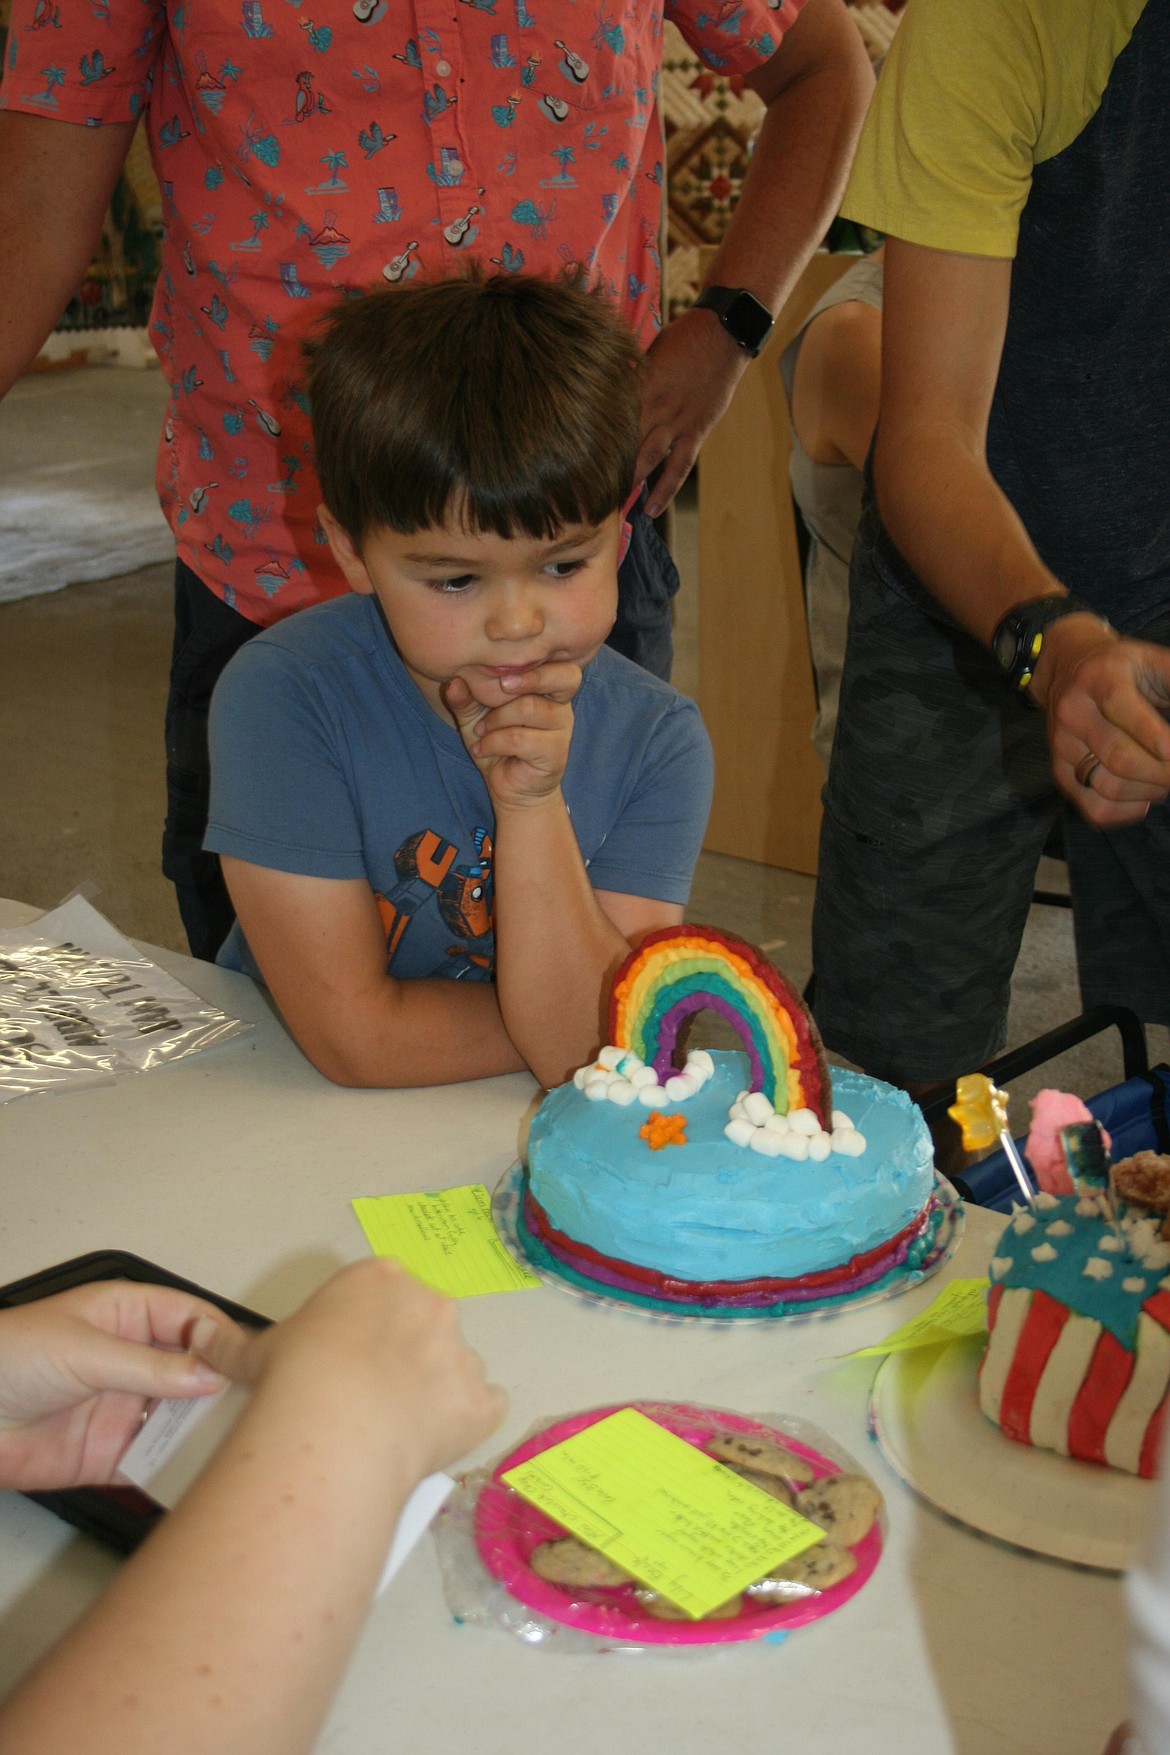 Liam Beck enters his cake in the baking division at the Grant County Fair Monday. While the fair officially opens today; competitors, volunteers and organizers were busy Monday setting everything up for visitors to enjoy.